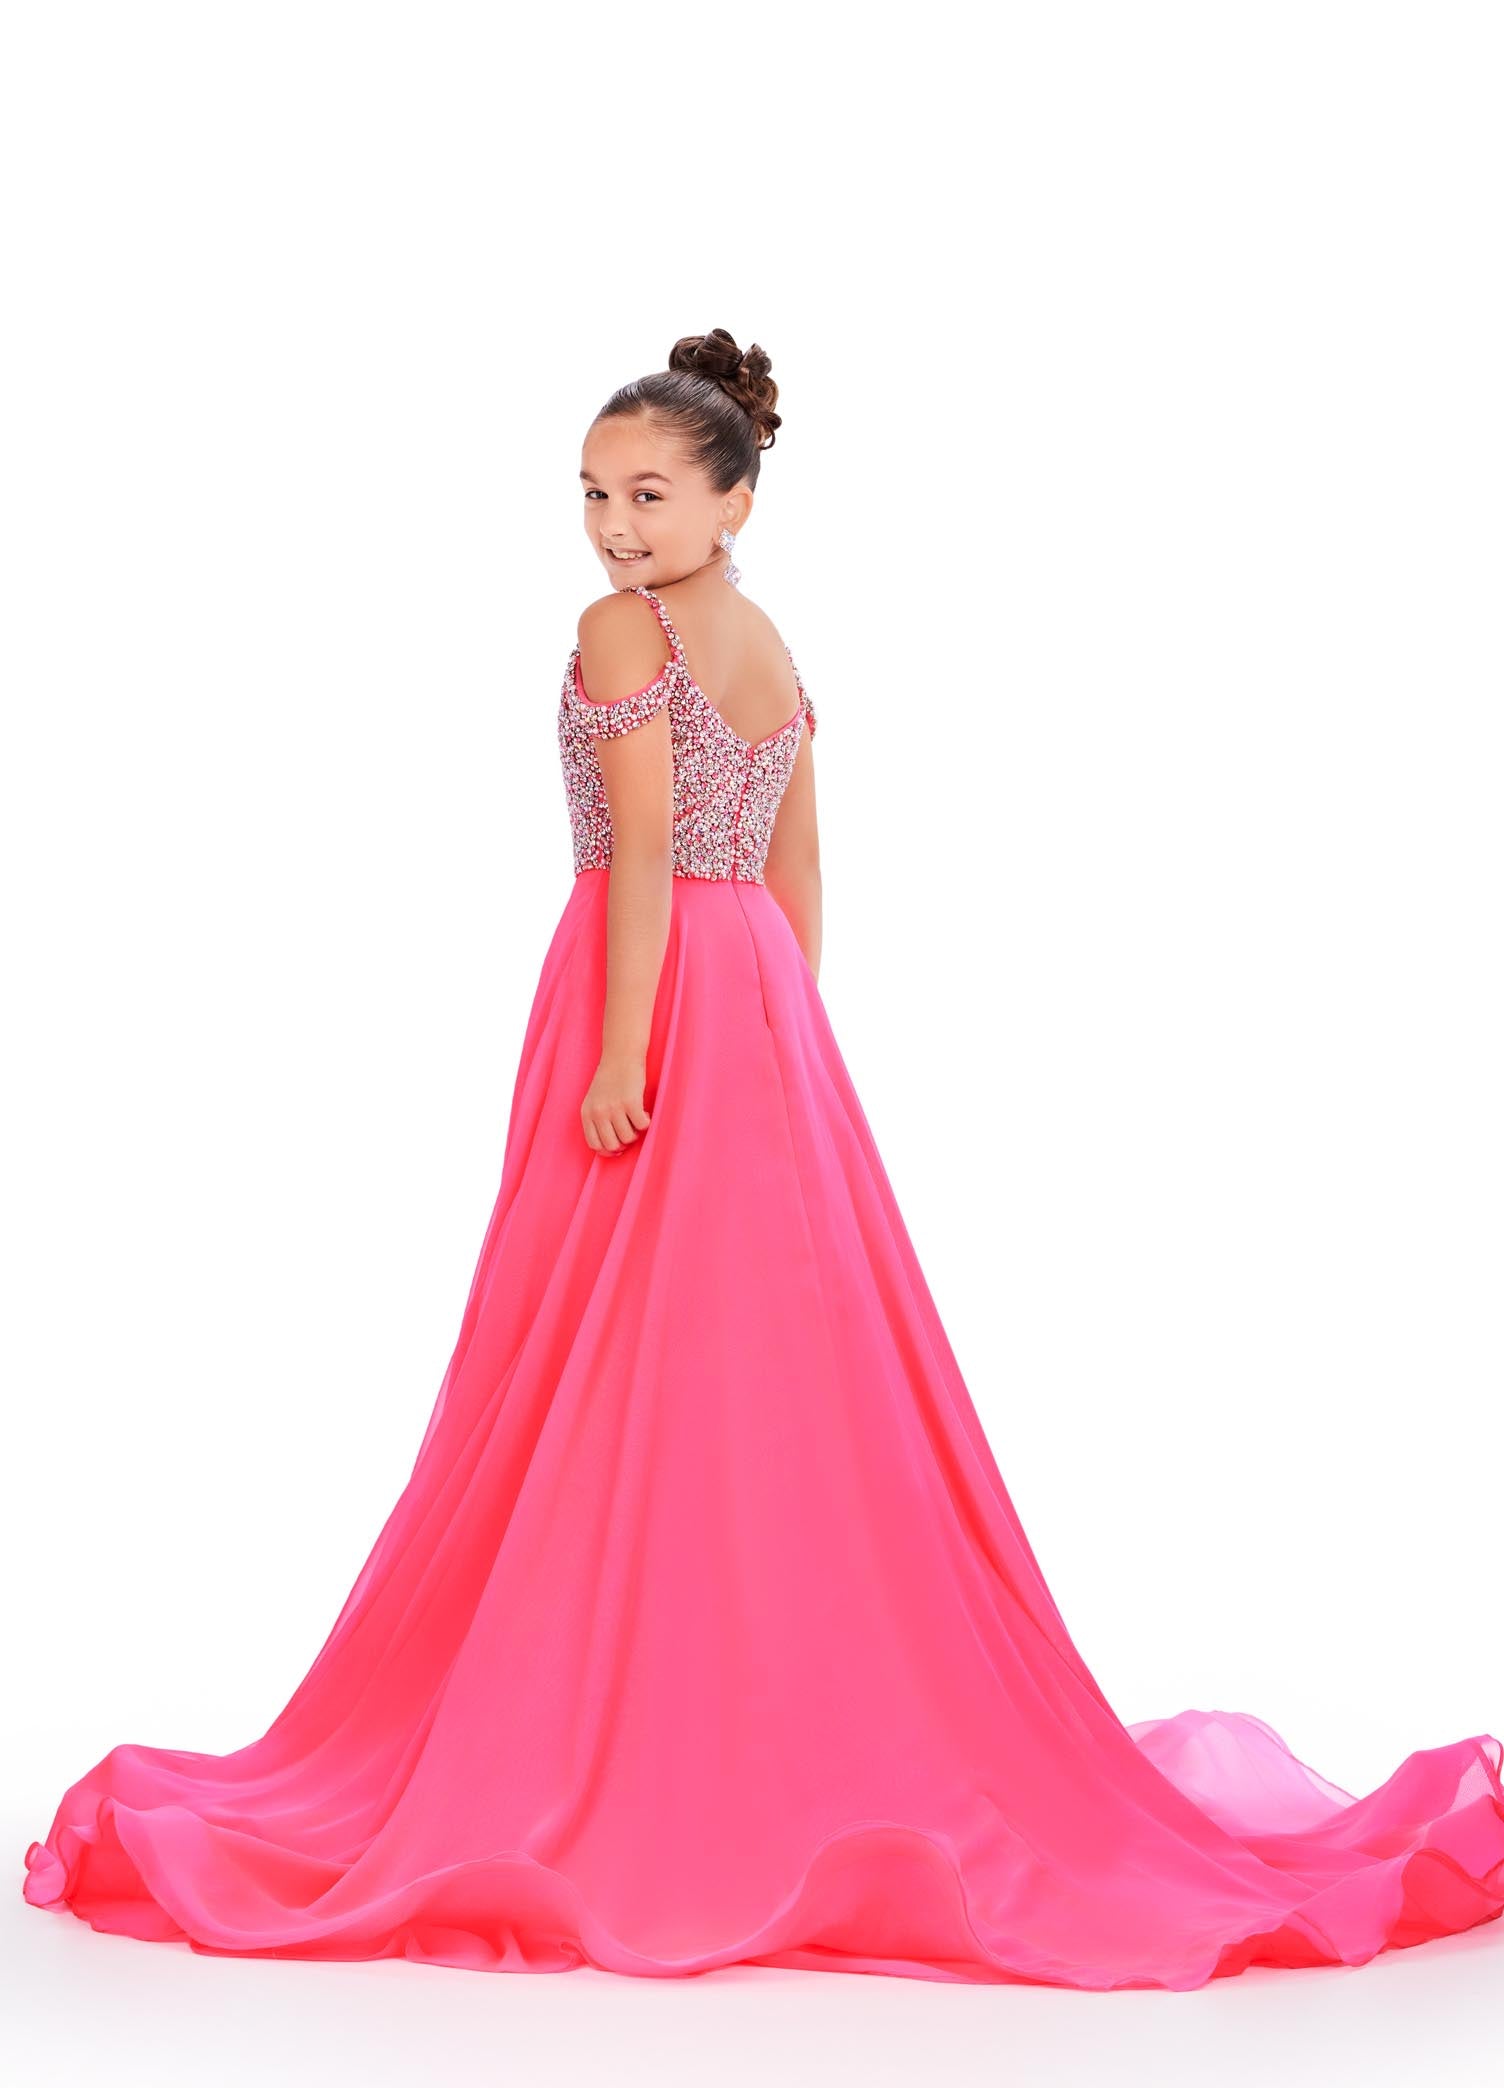 Ashley Lauren Kids 8220 Beaded Bustier A-Line Off The Shoulder Sweetheart Neckline Chiffon Gown. We are obsessed with this elegant gown! The fully beaded bodice features off shoulder straps and a fabulous, flowy chiffon skirt.